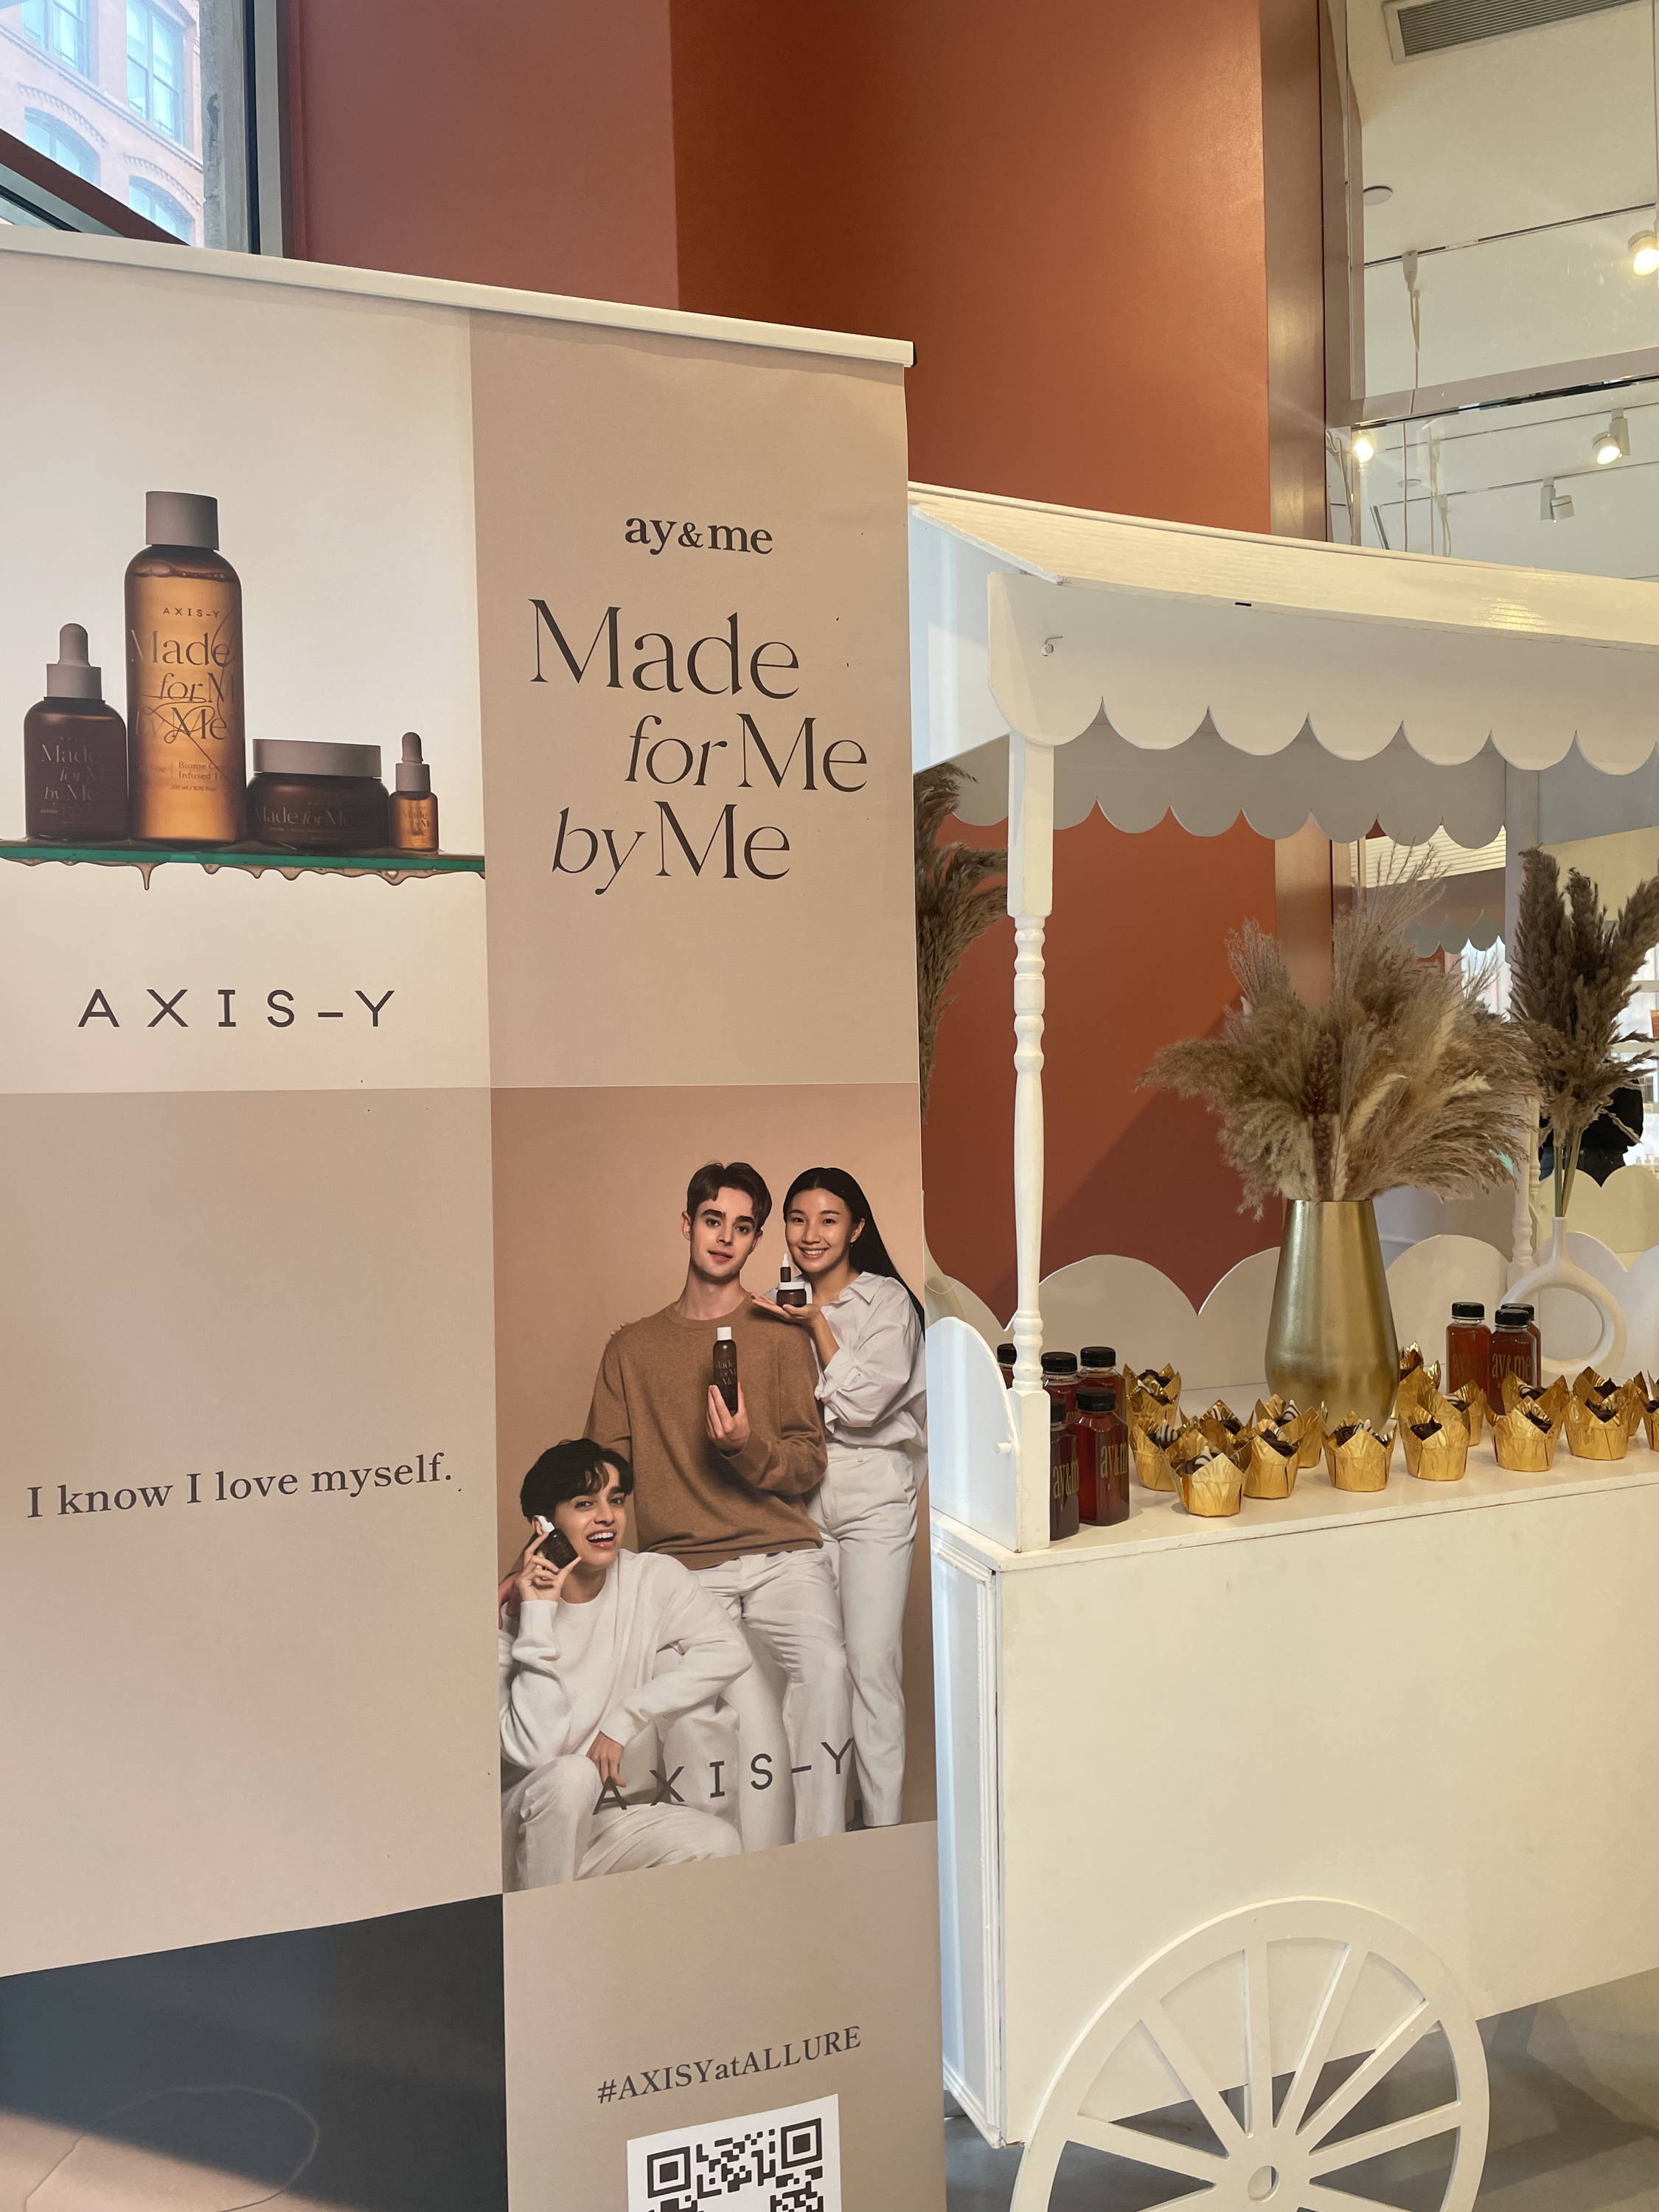 ay&me Launch Event in Allure Store, New York City